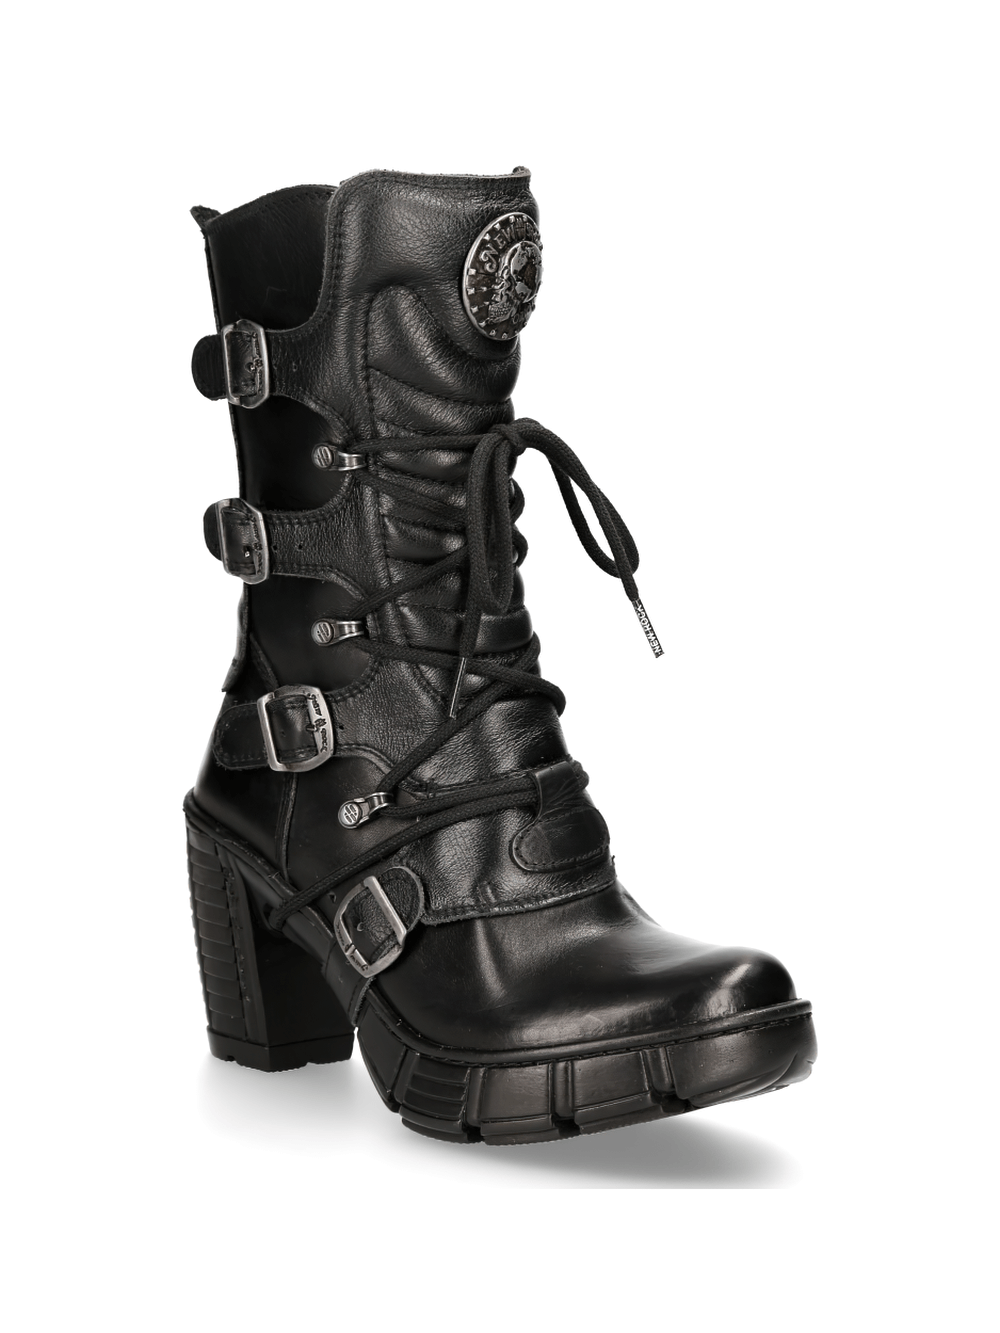 NEW ROCK Edgy Black Buckle-Detail Ankle Boots With Lace-Up